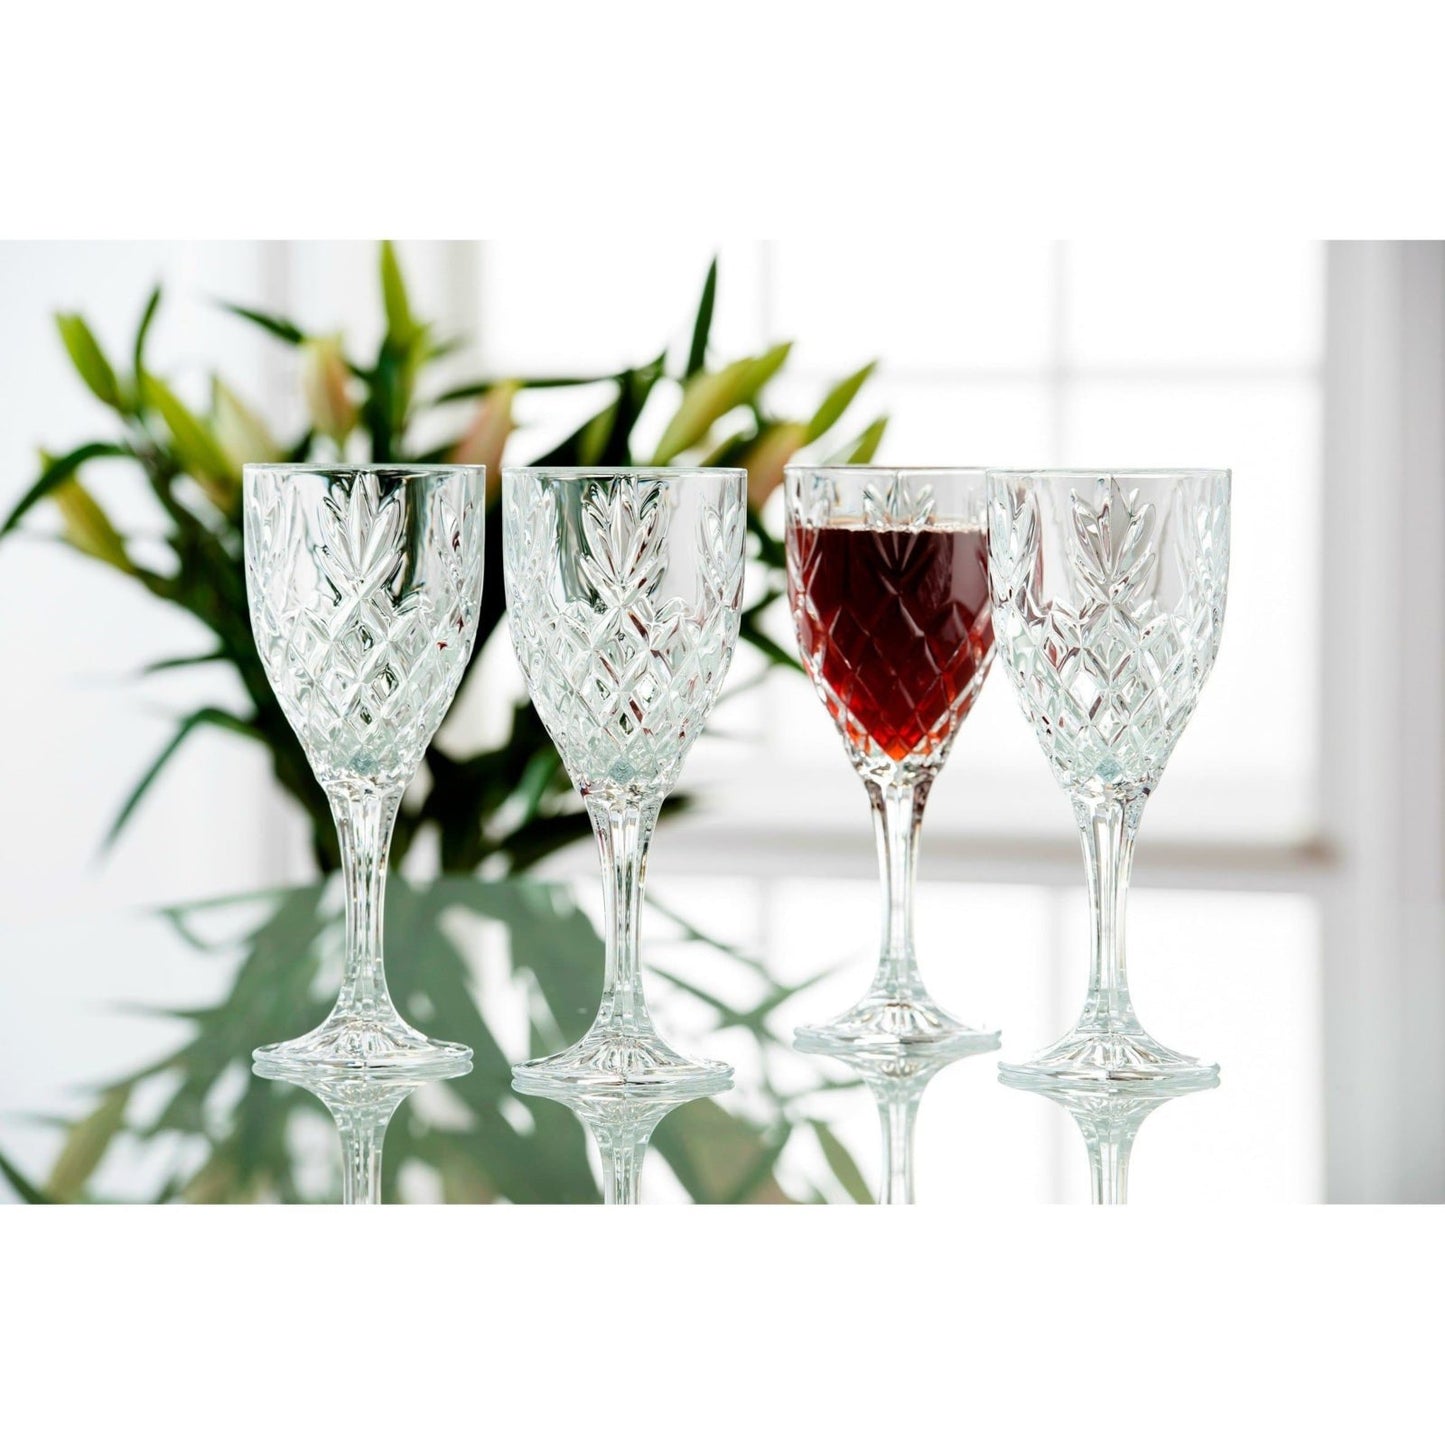 Galway Crystal Renmore Goblets set of 4